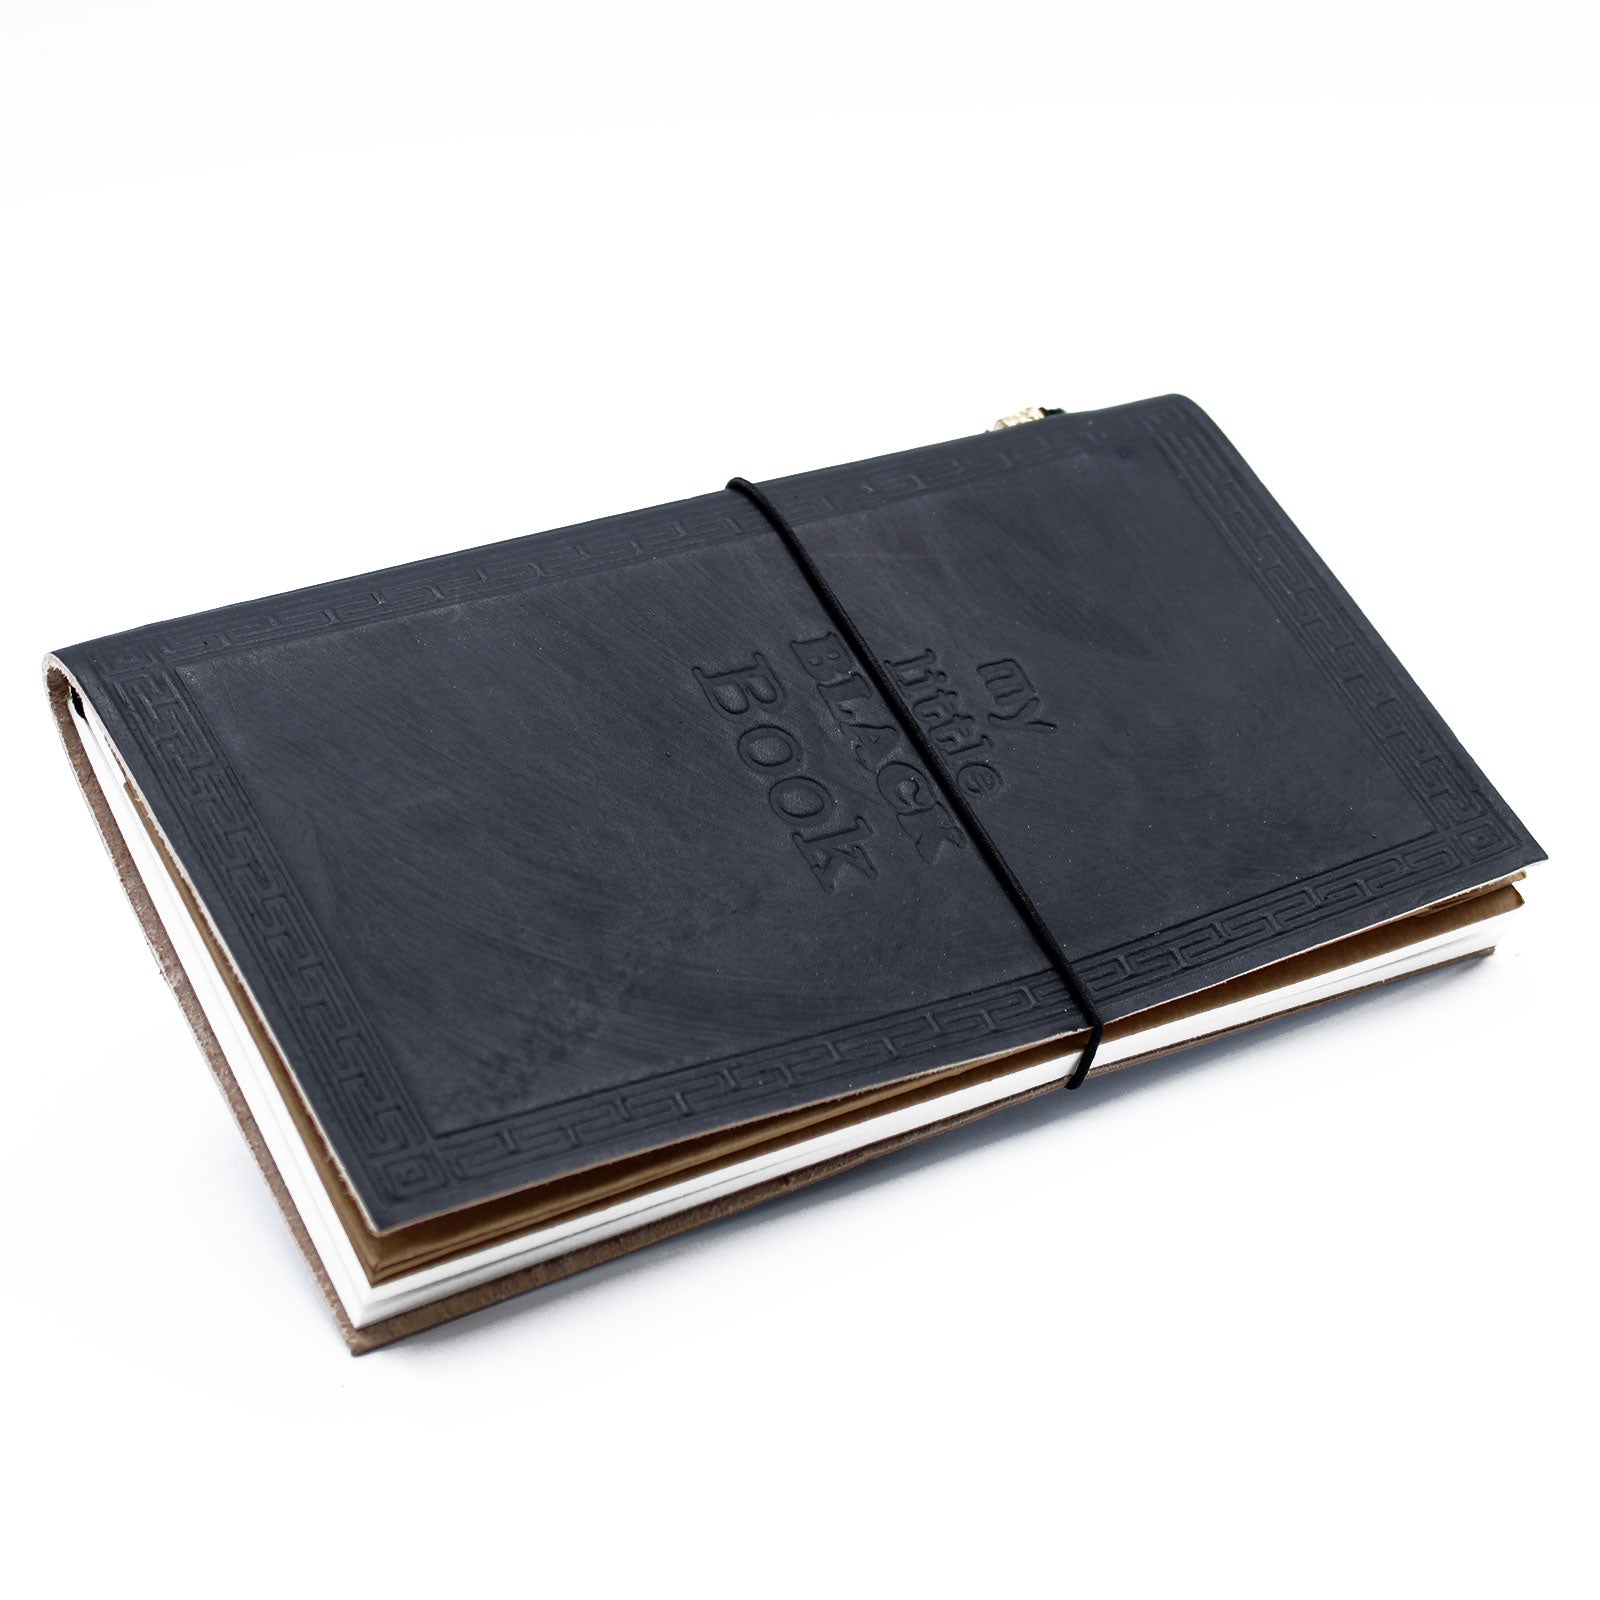 View Handmade Leather Journal My Little Black Book Black 80 pages information